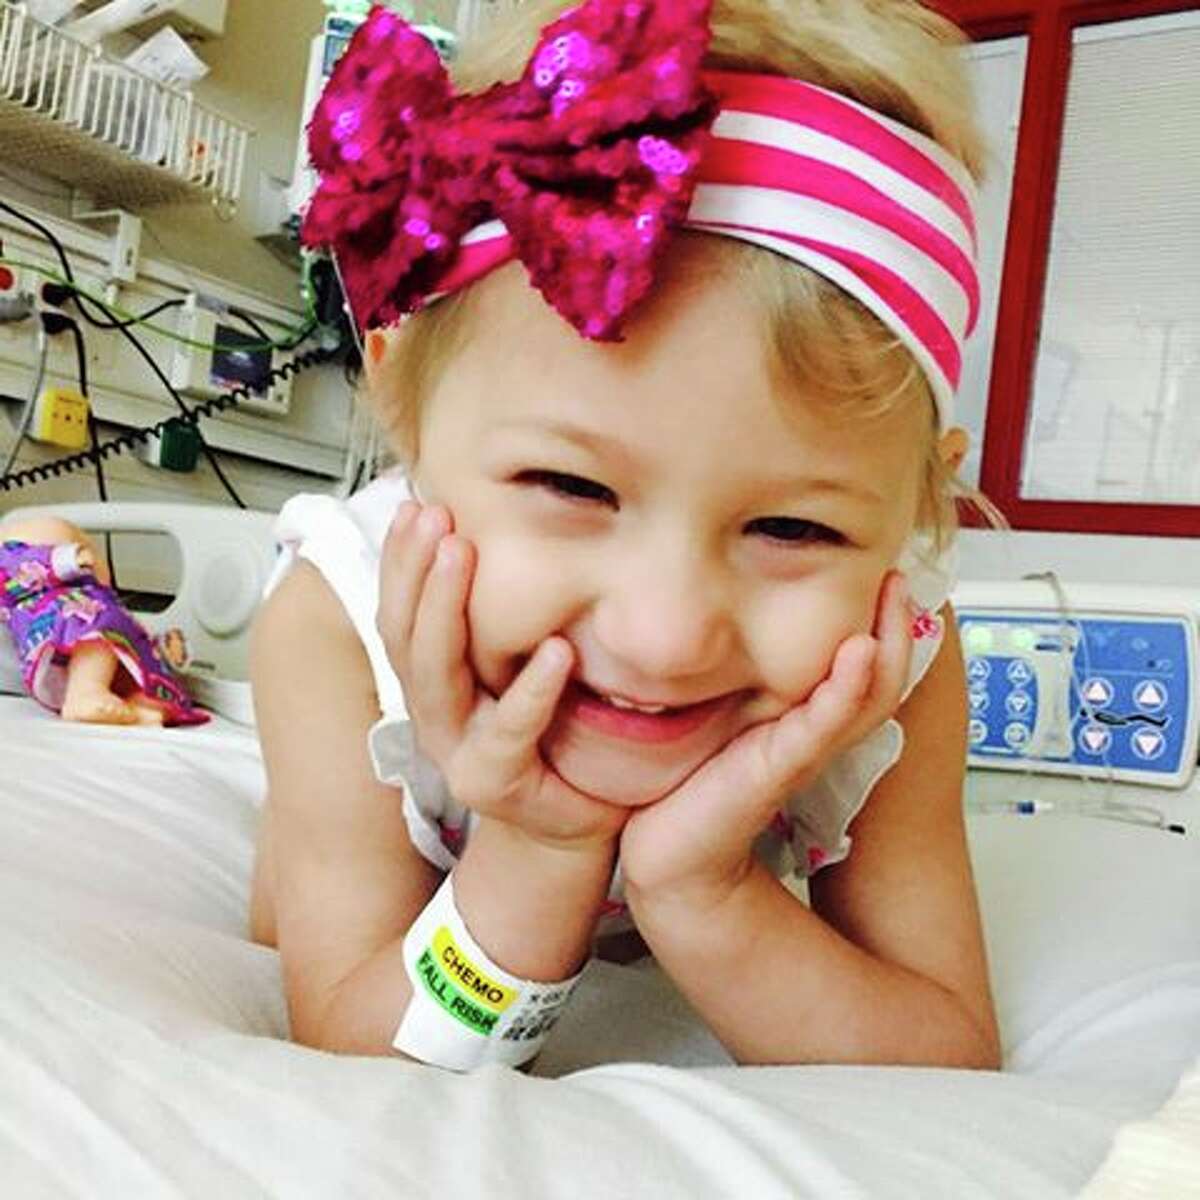 Orangefield resident Austyn Halter, 4, died on Friday following a two year battle with a rare form of leukemia. Funeral services will be held for Halter this week.